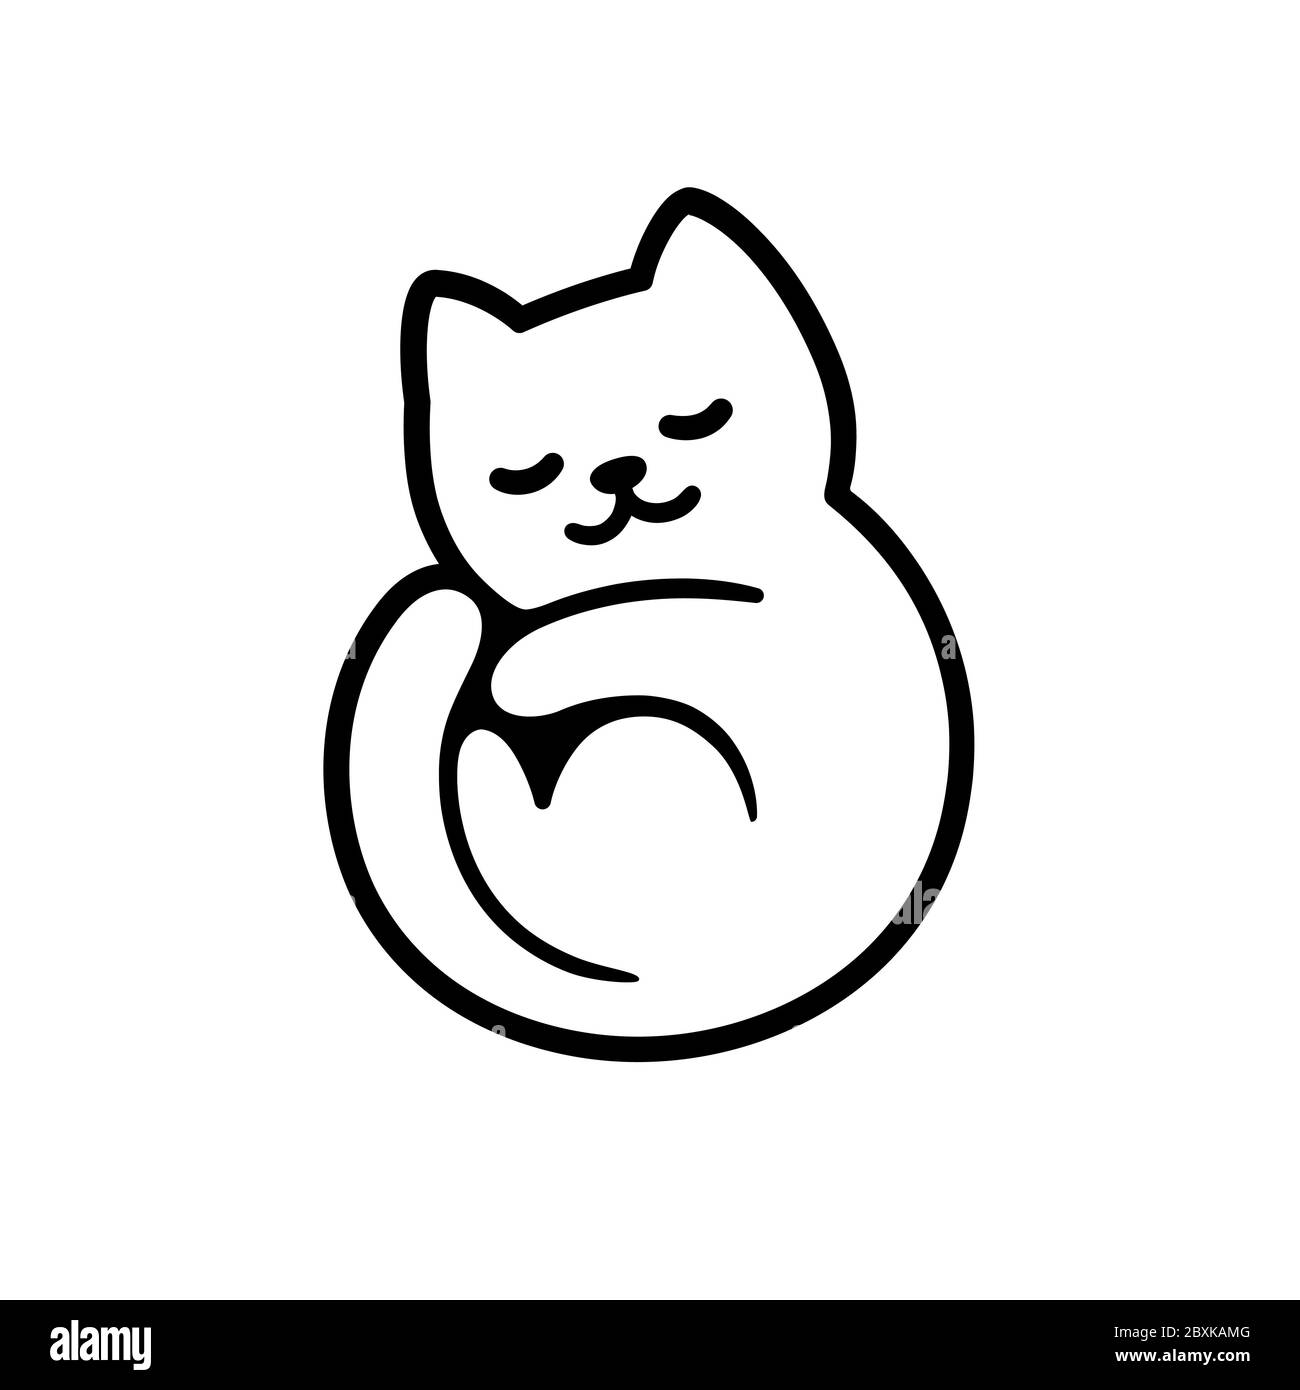 Cute cartoon cat logo, sleeping curled in circle. Adorable kitty symbol. Isolated vector clip art illustration. Stock Vector